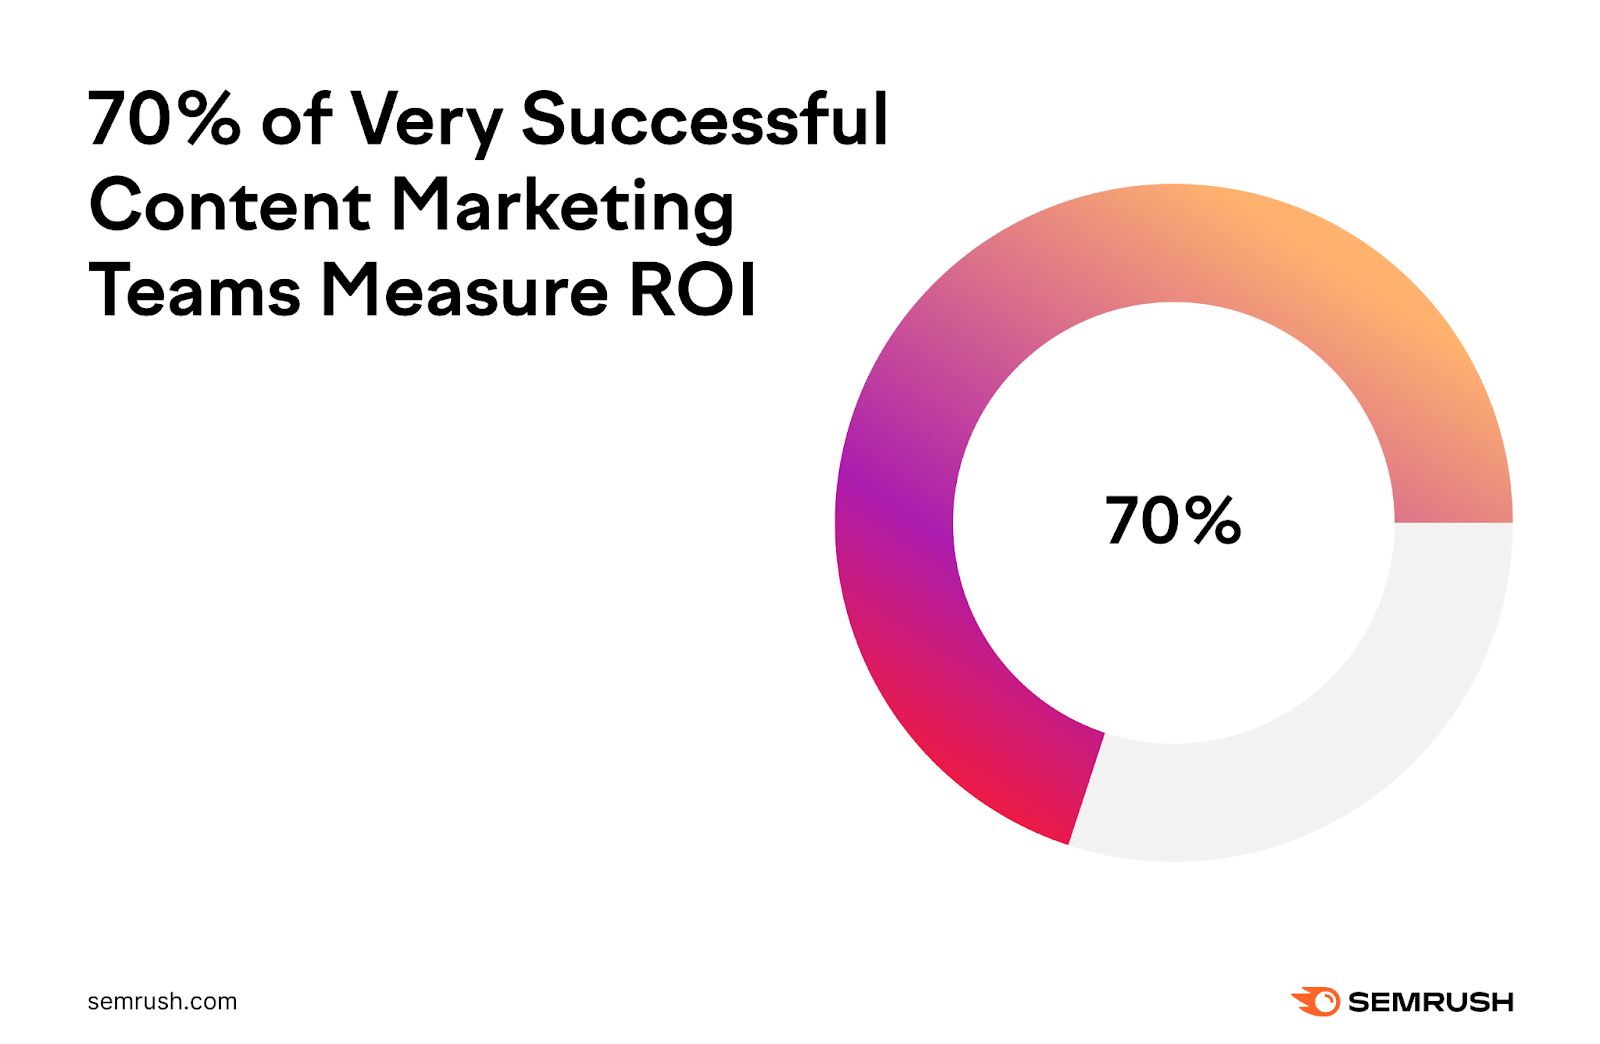 70% of very successful content marketing teams measure ROI